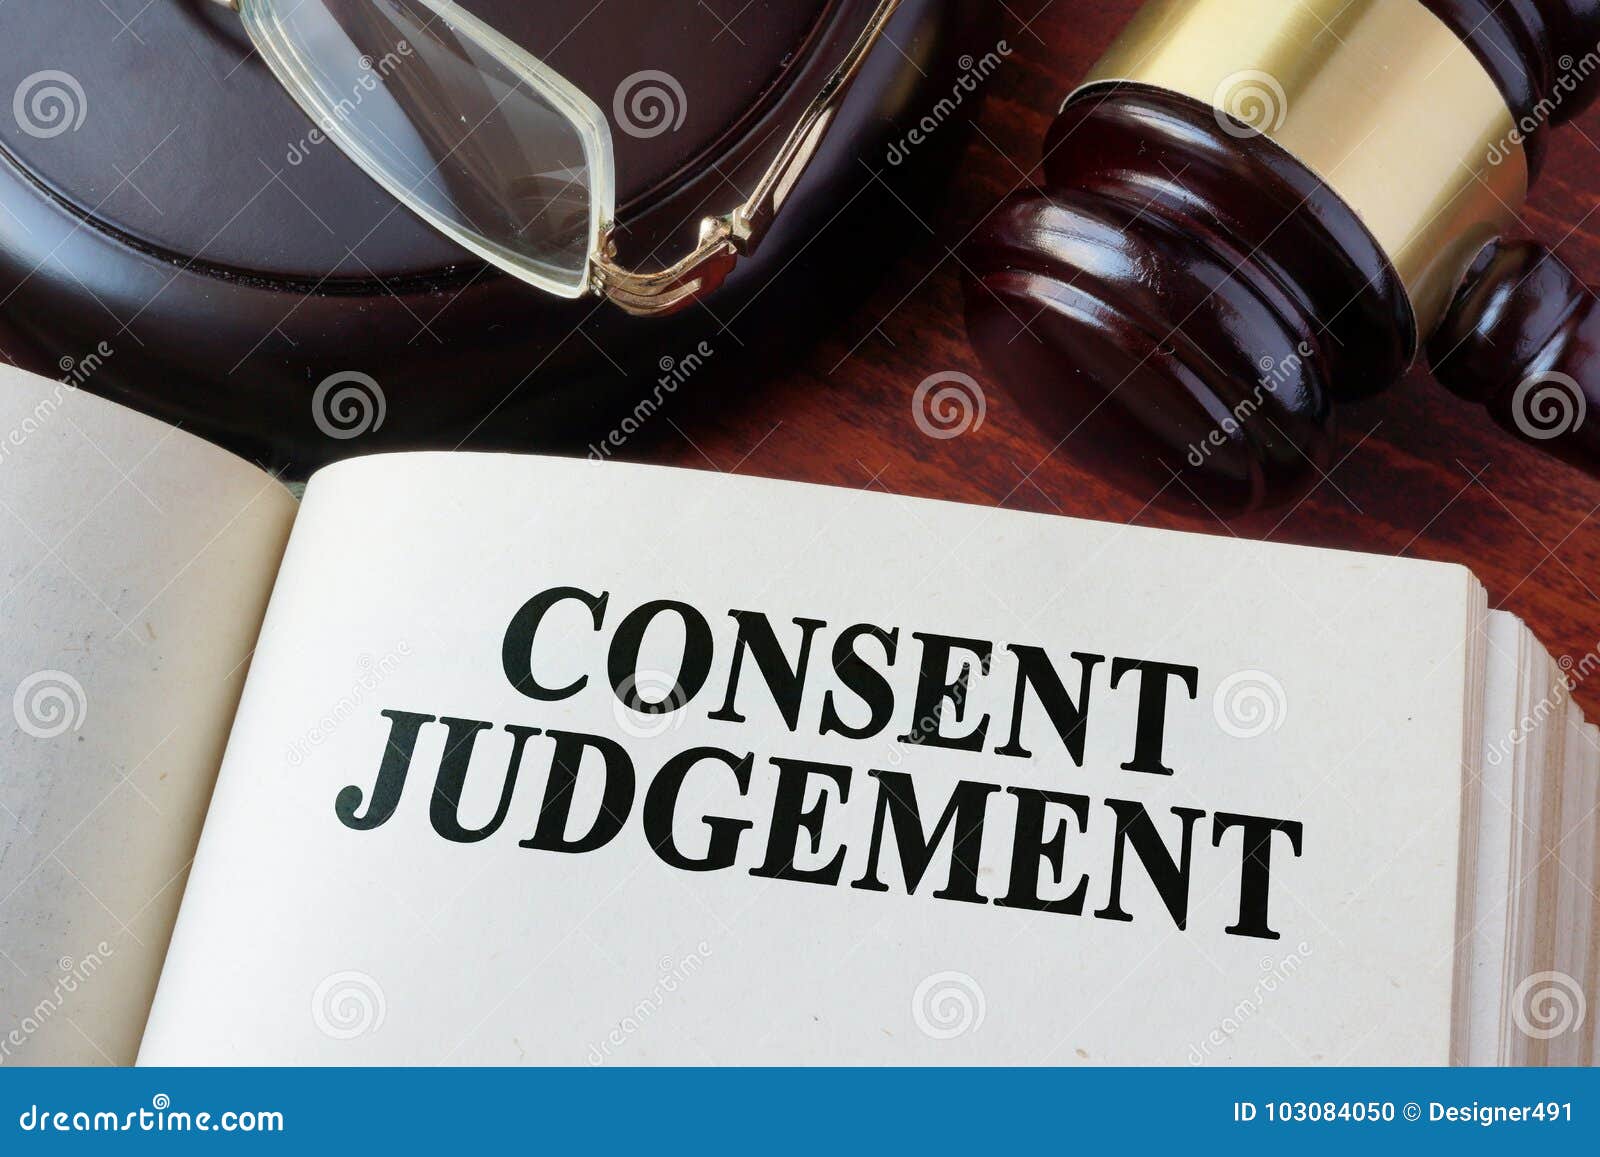 consent judgement and a gavel.